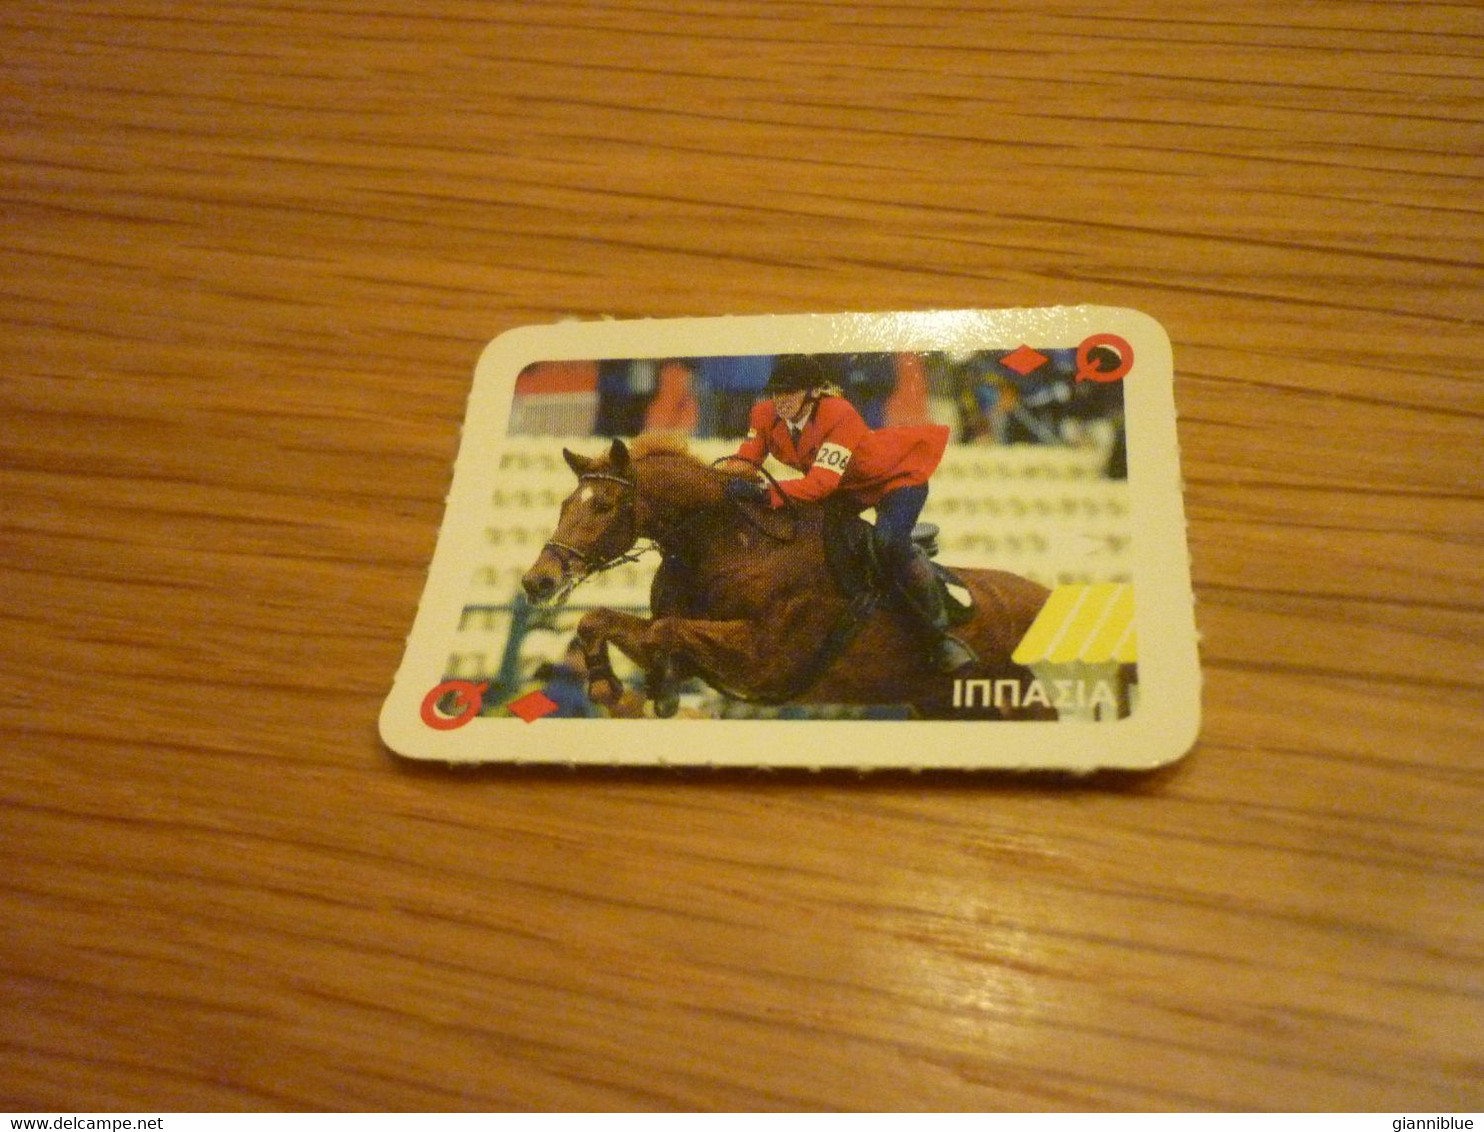 Equestrian Cheval Horse Olympic Games Greek Mini Trading Playing Card - Hipismo